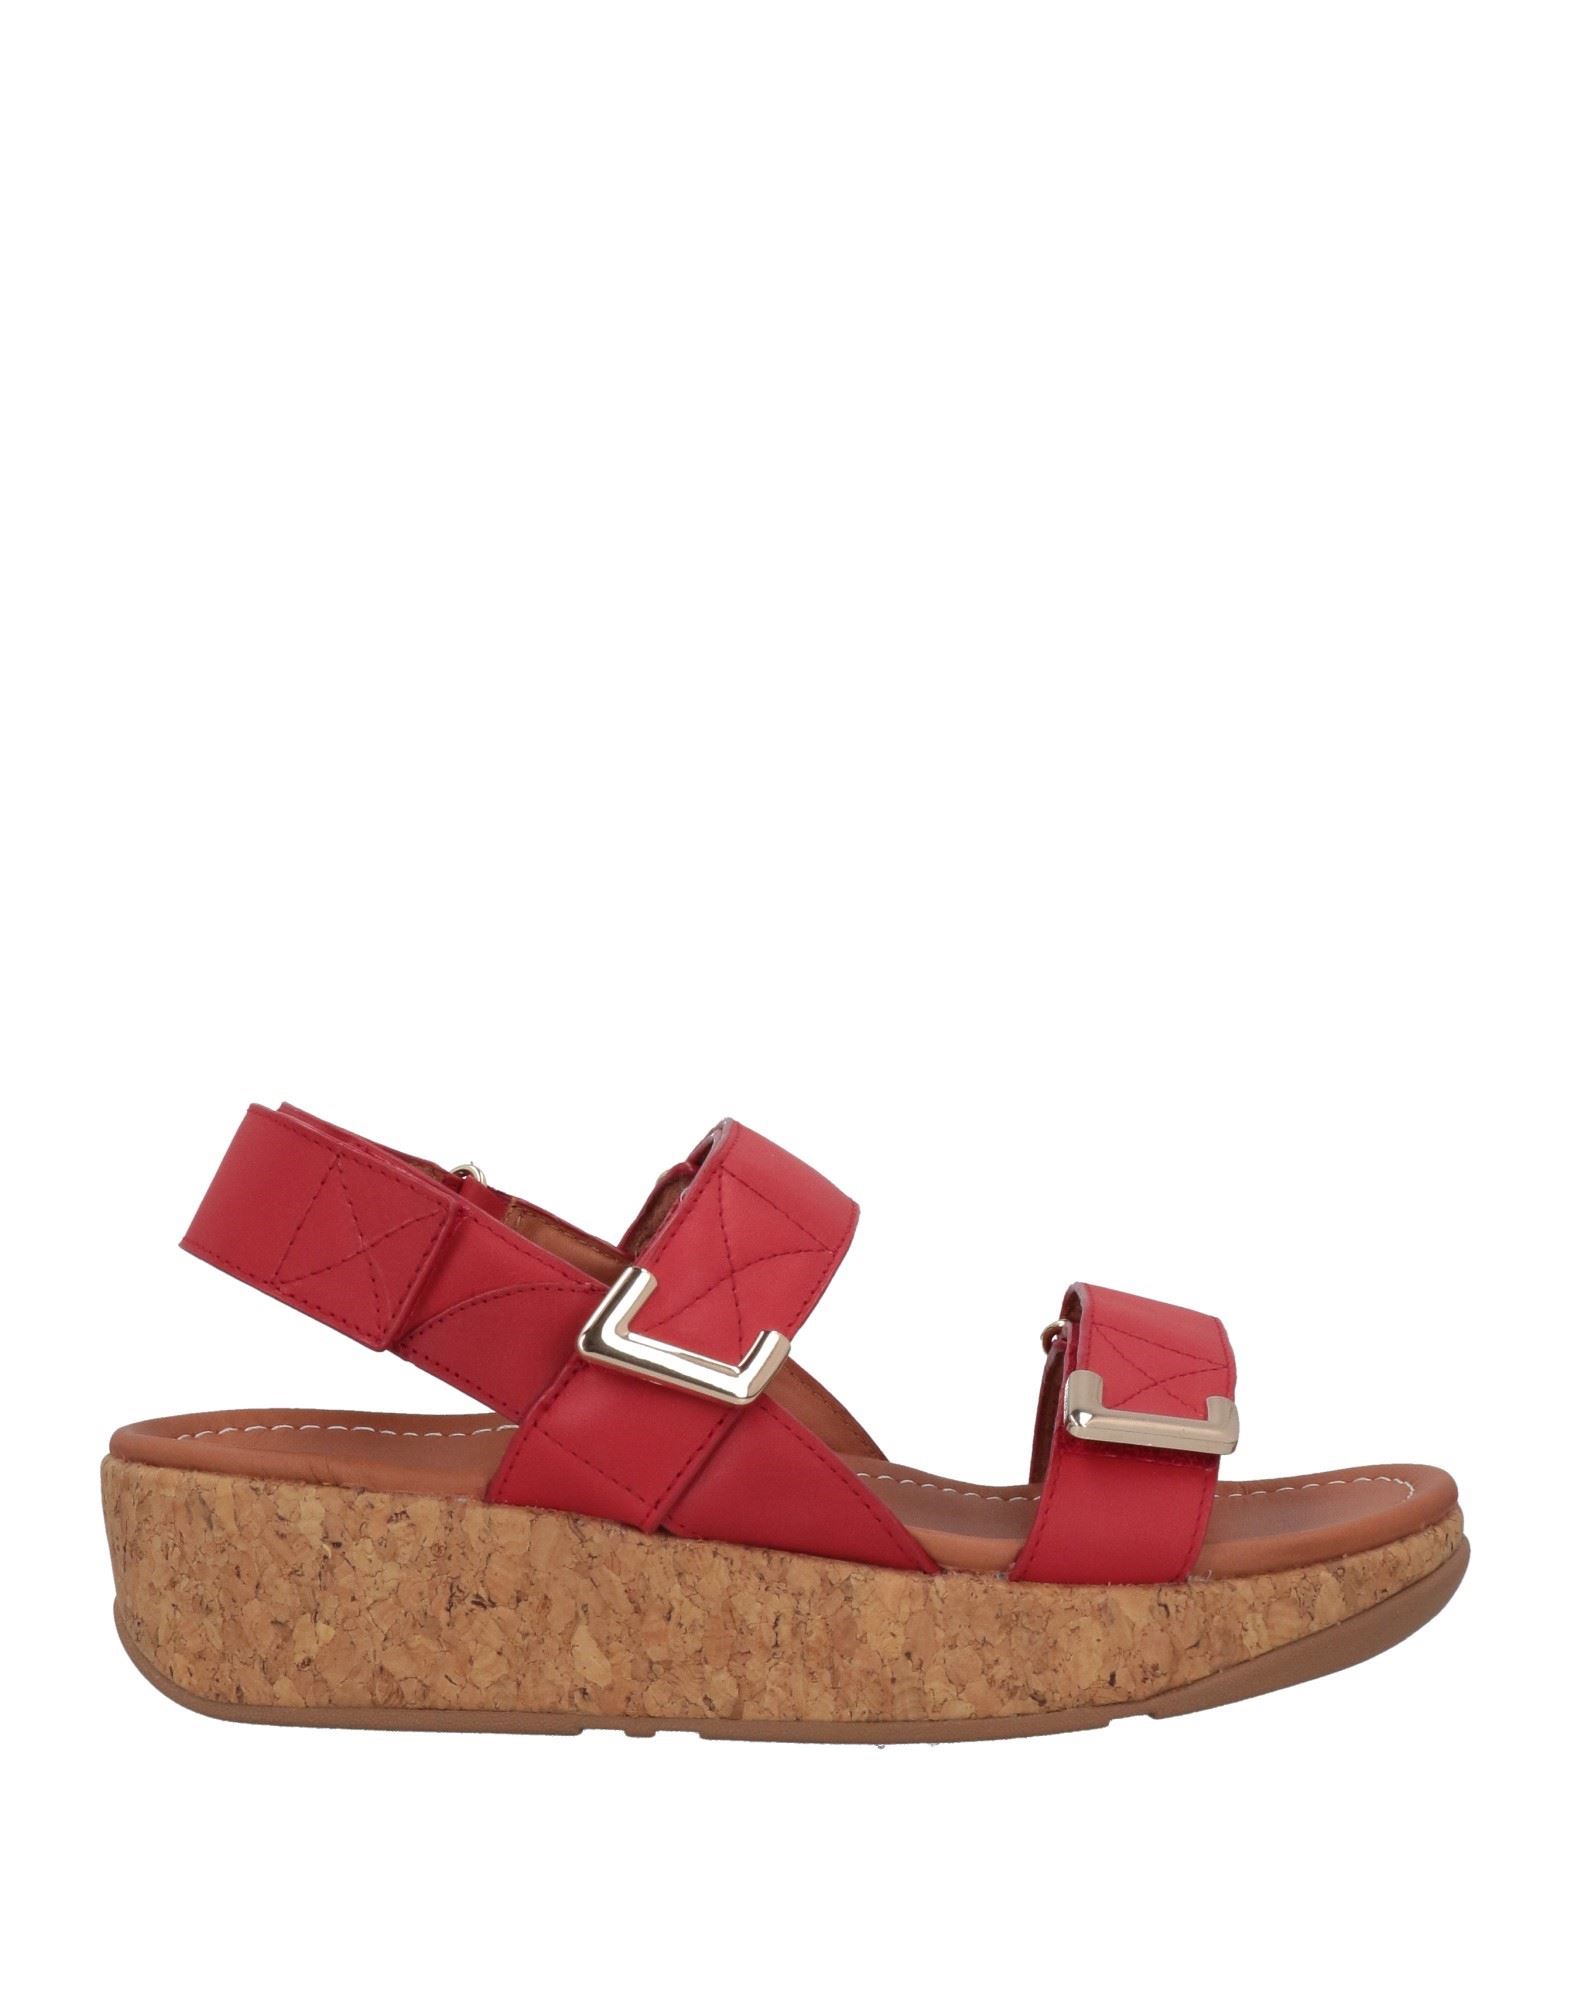 Fitflop Woman Mules & Clogs Red Size 8.5 Soft Leather